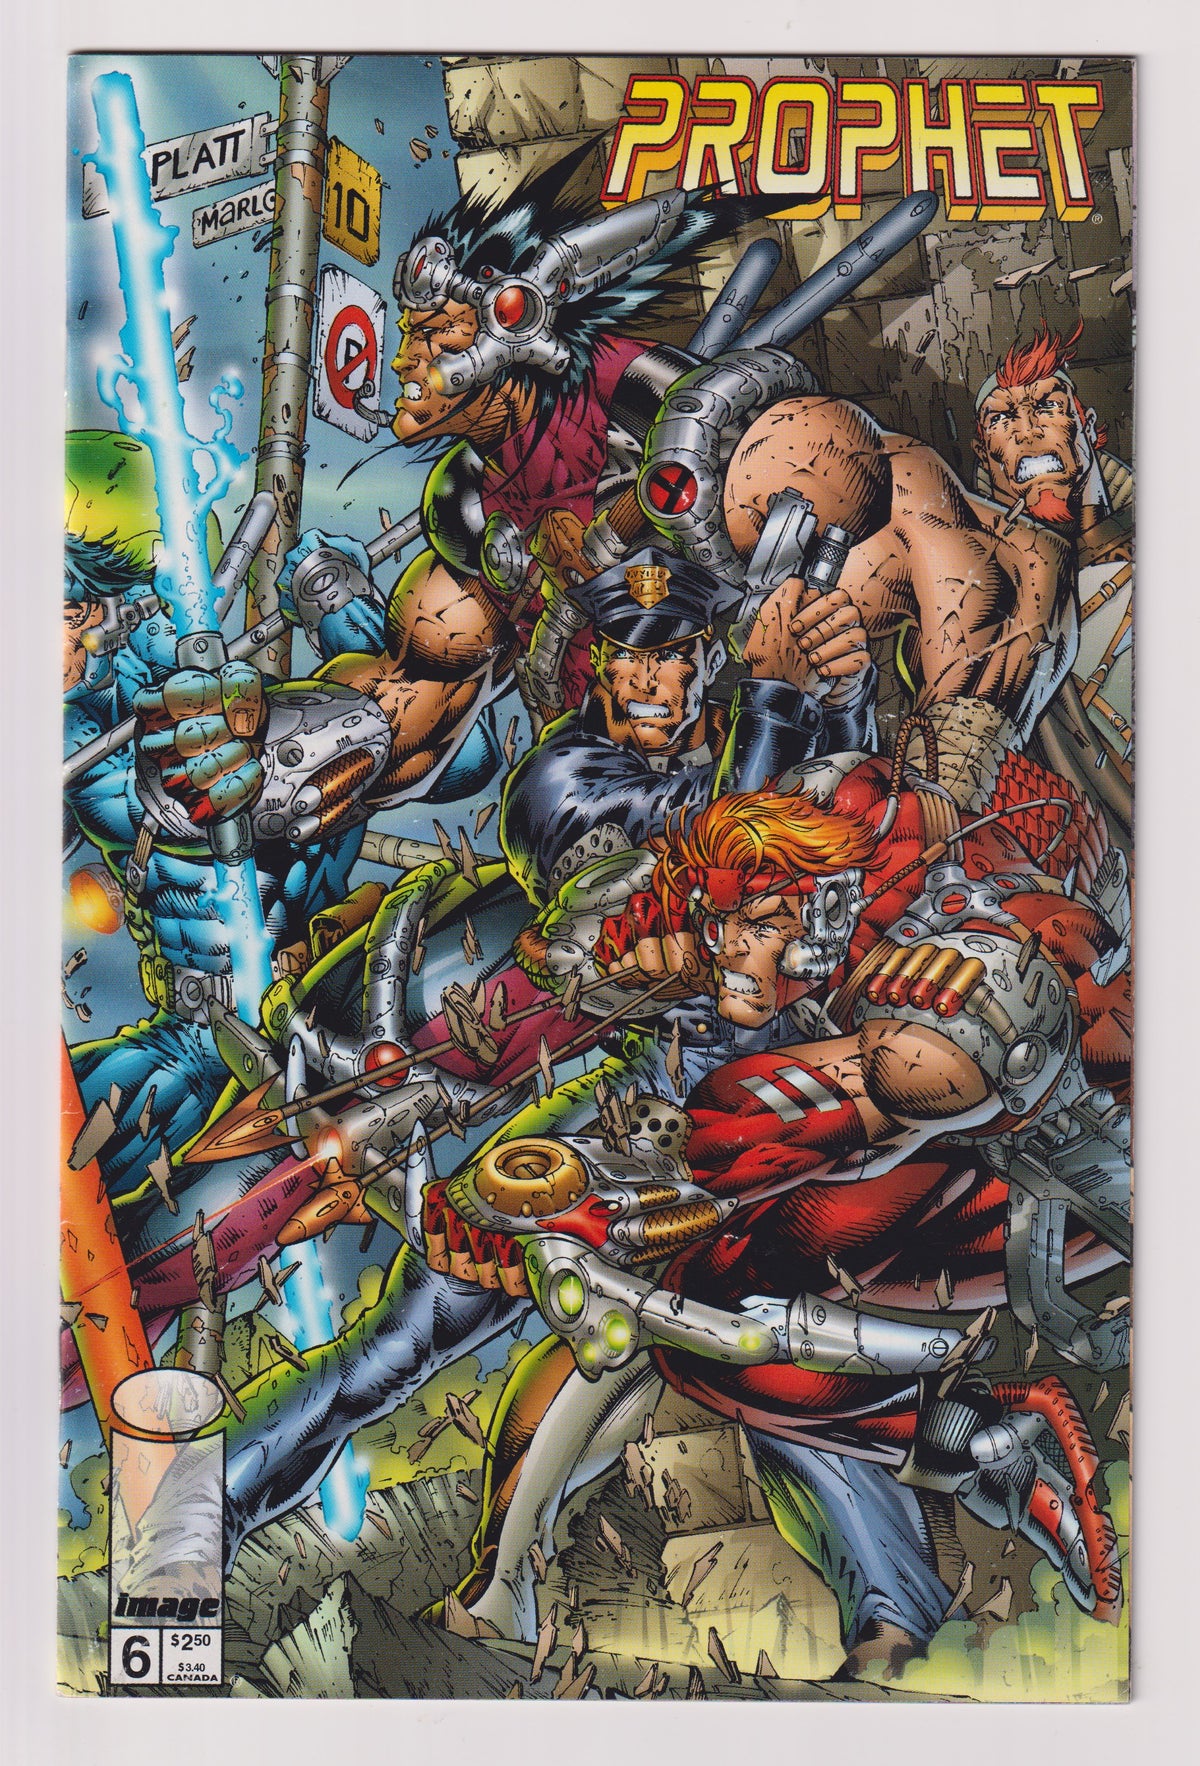 Photo of Prophet, Vol. 2 (1996)  Iss 6   Comic sold by Stronghold Collectibles